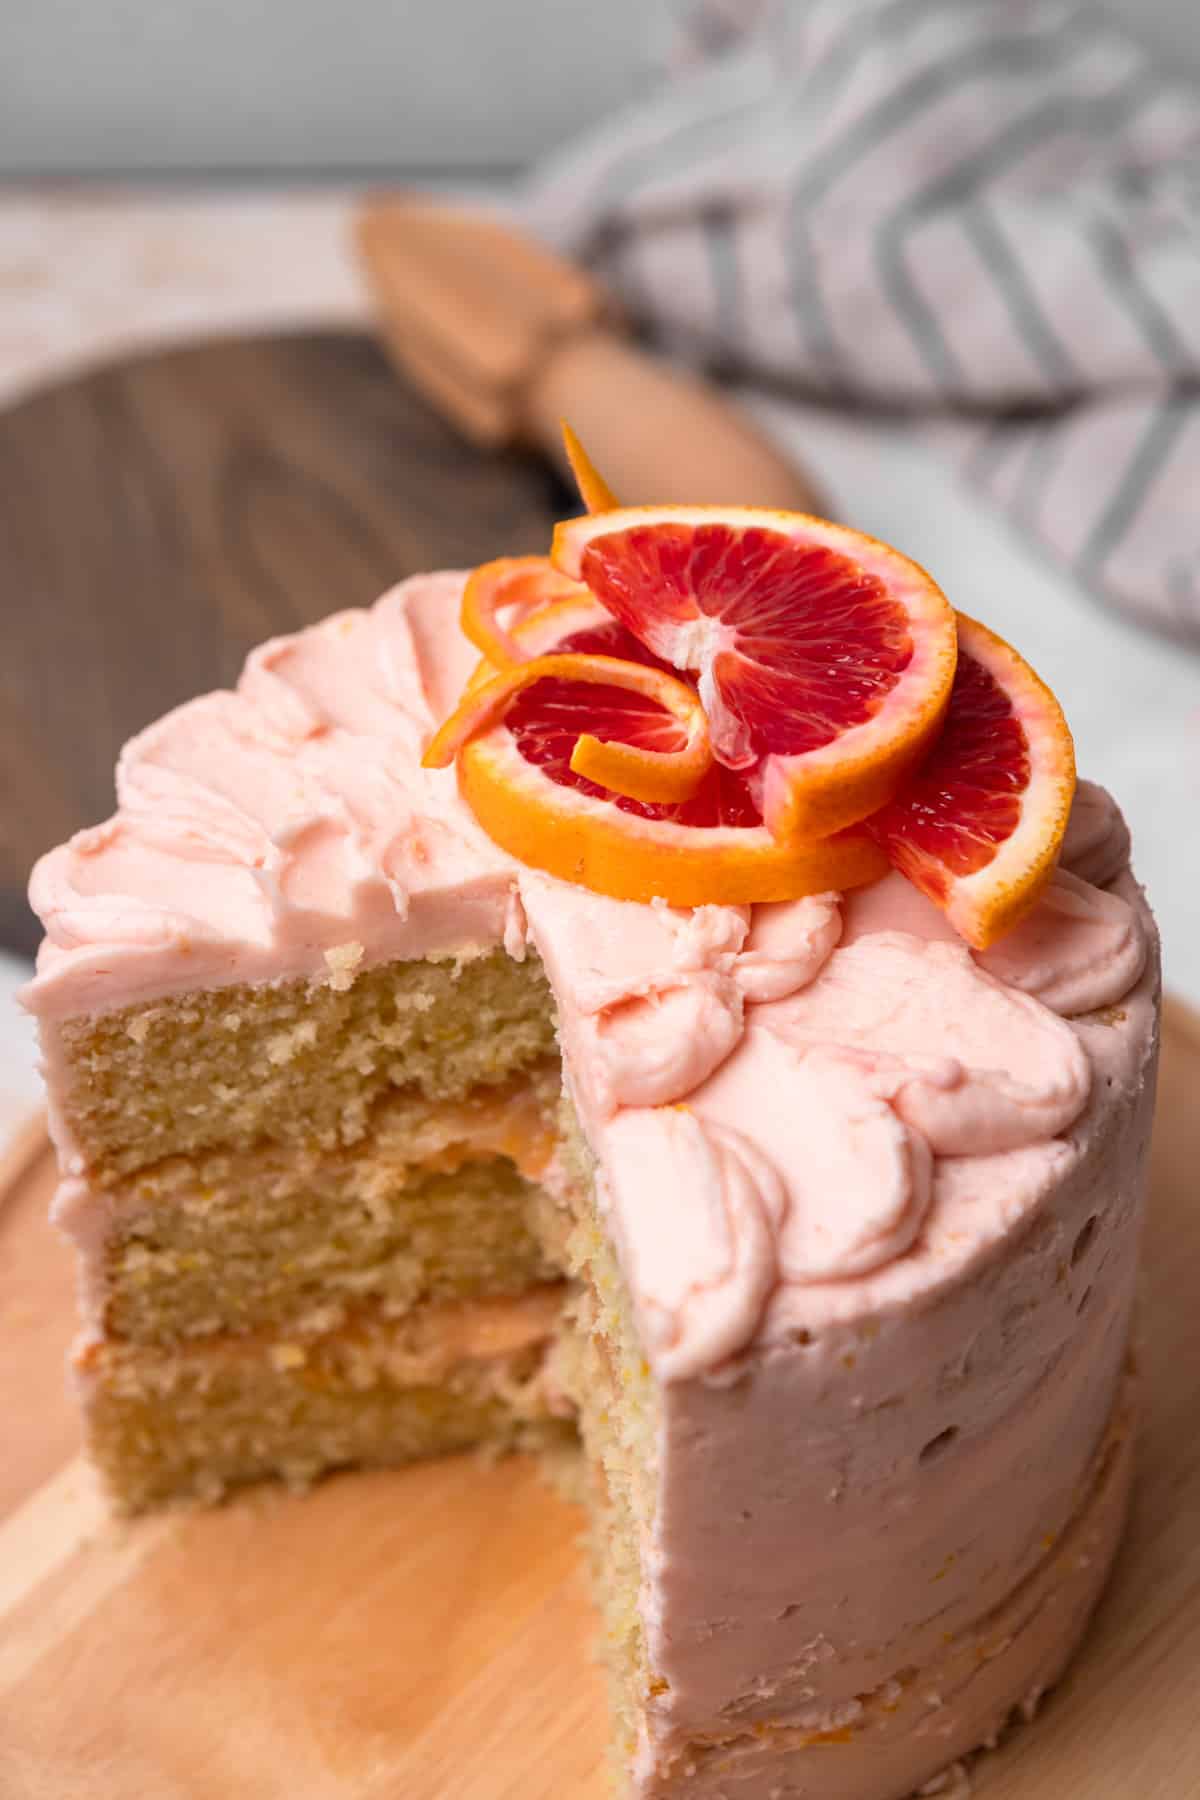 A blood orange cake cut open to show texture.